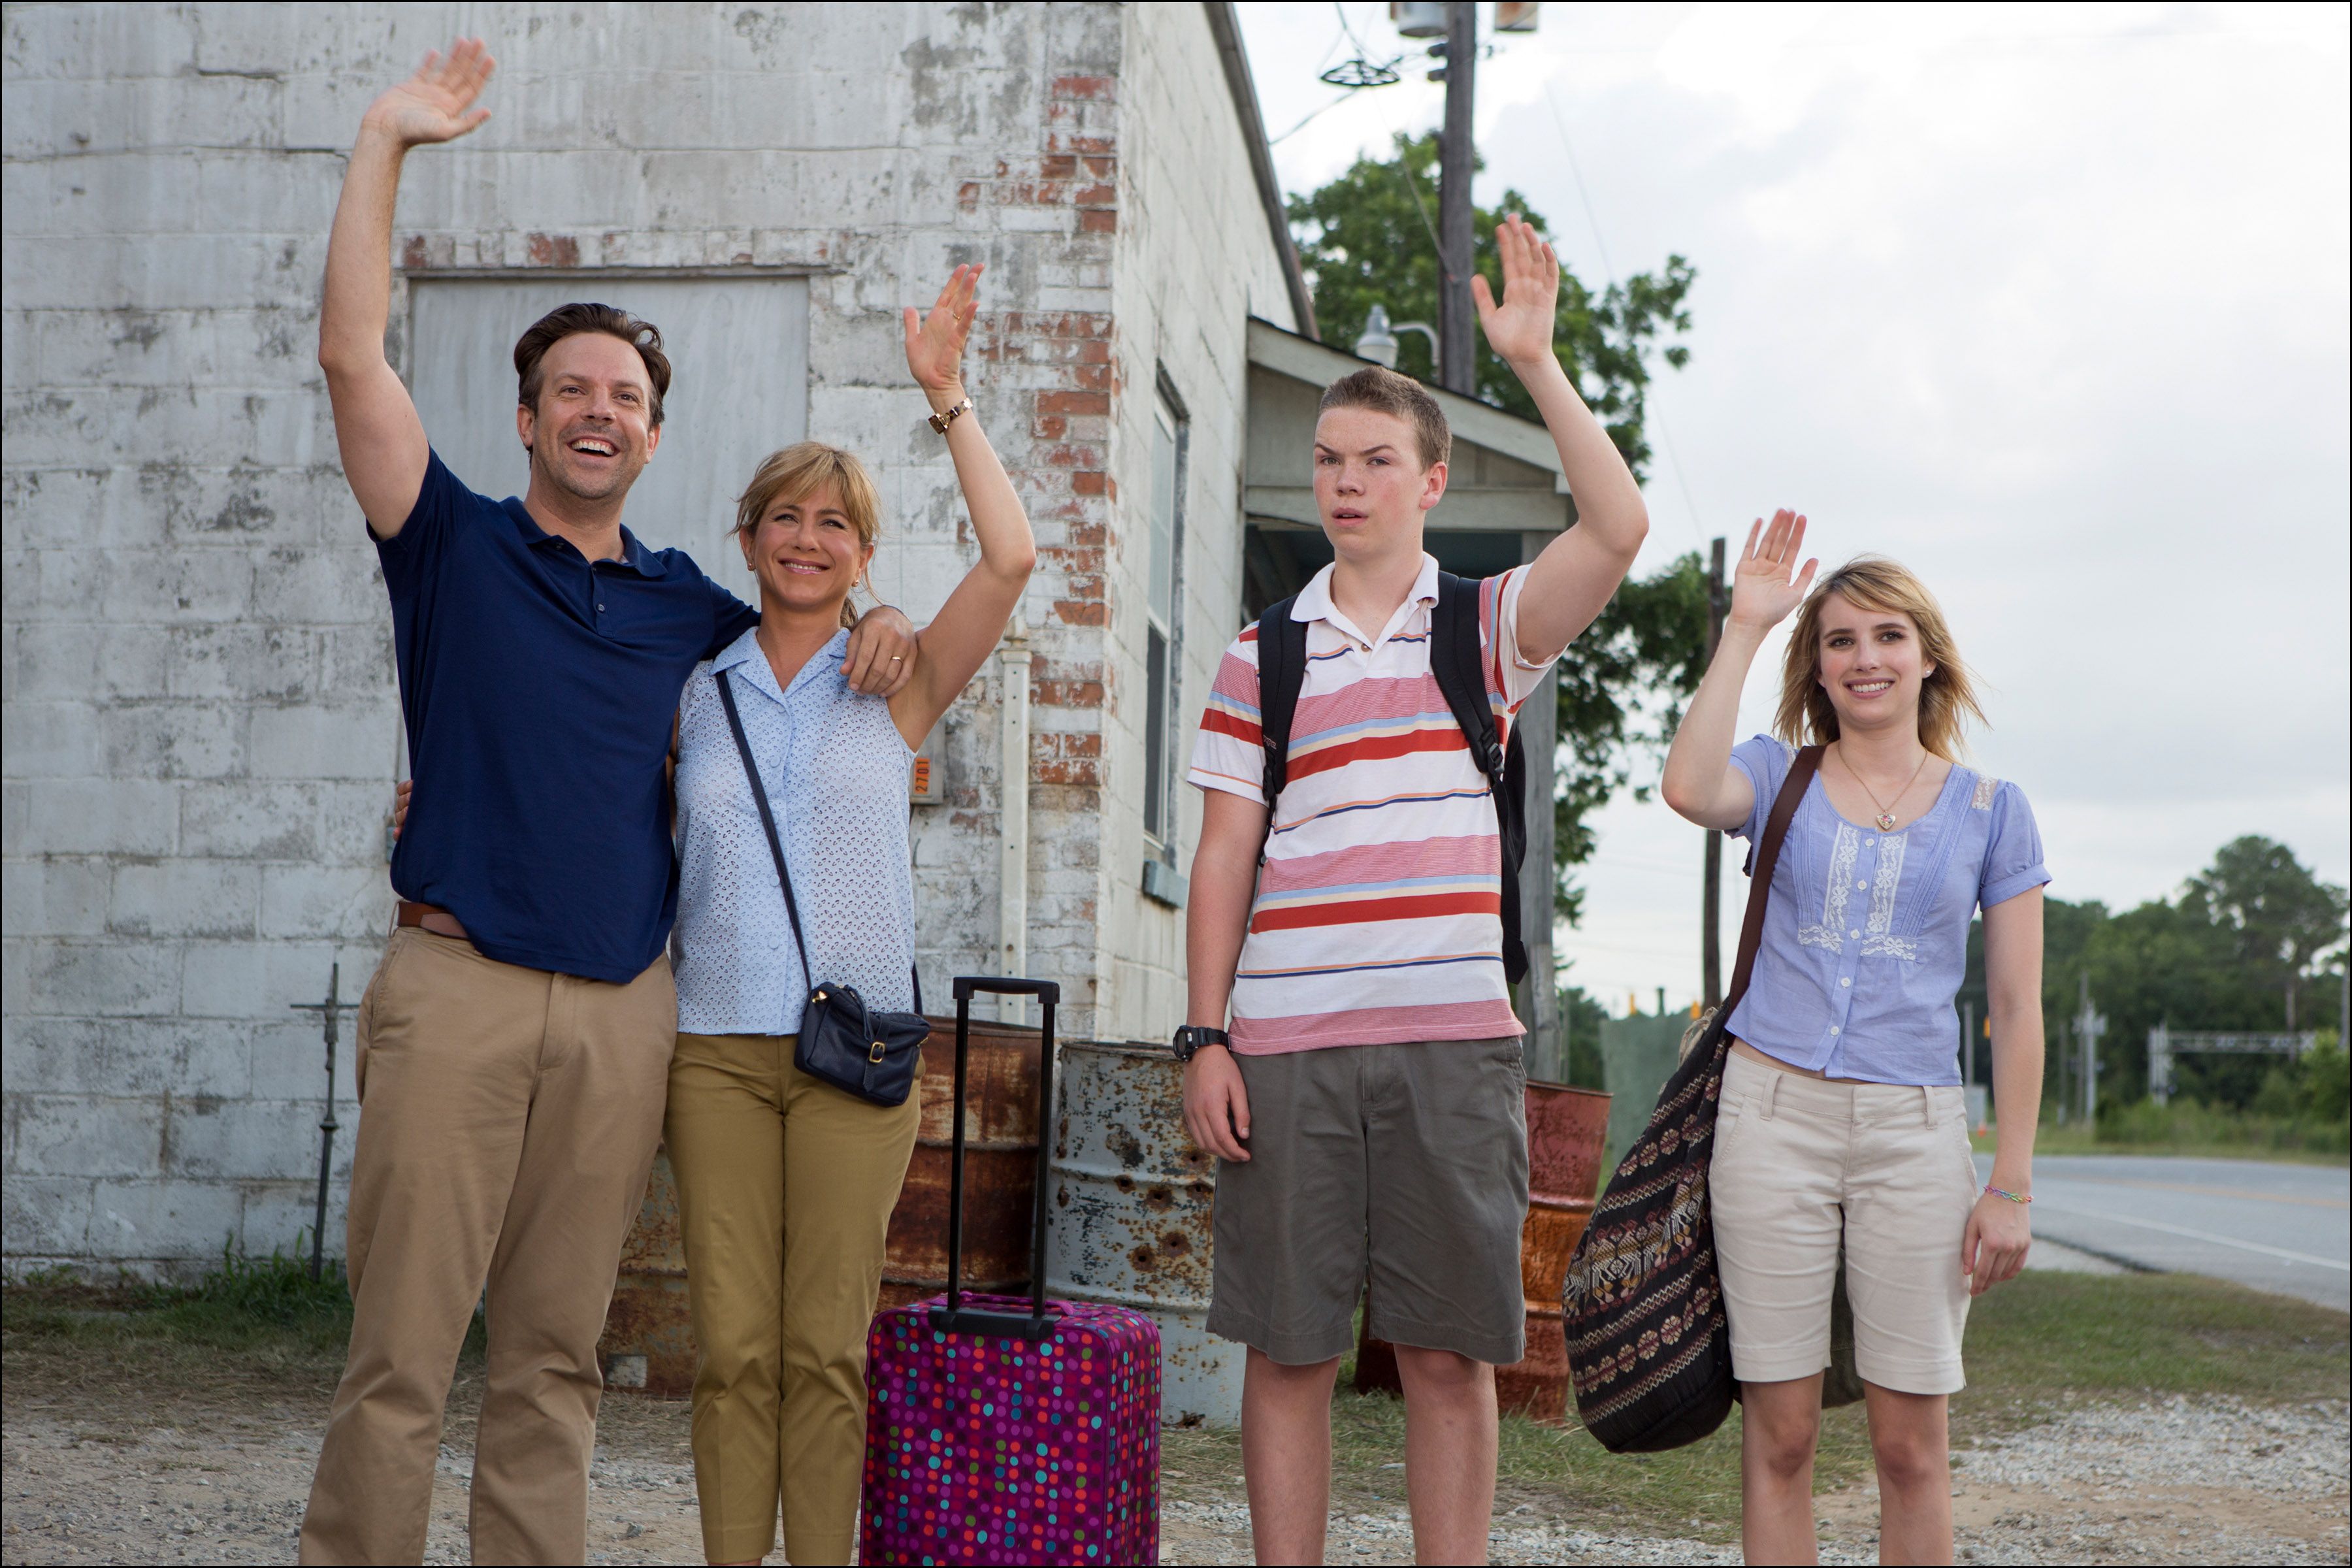 WE'RE THE MILLERS Image. WE'RE THE MILLERS Stars Jason Sudeikis, Jennifer Aniston, and Nick Offerman